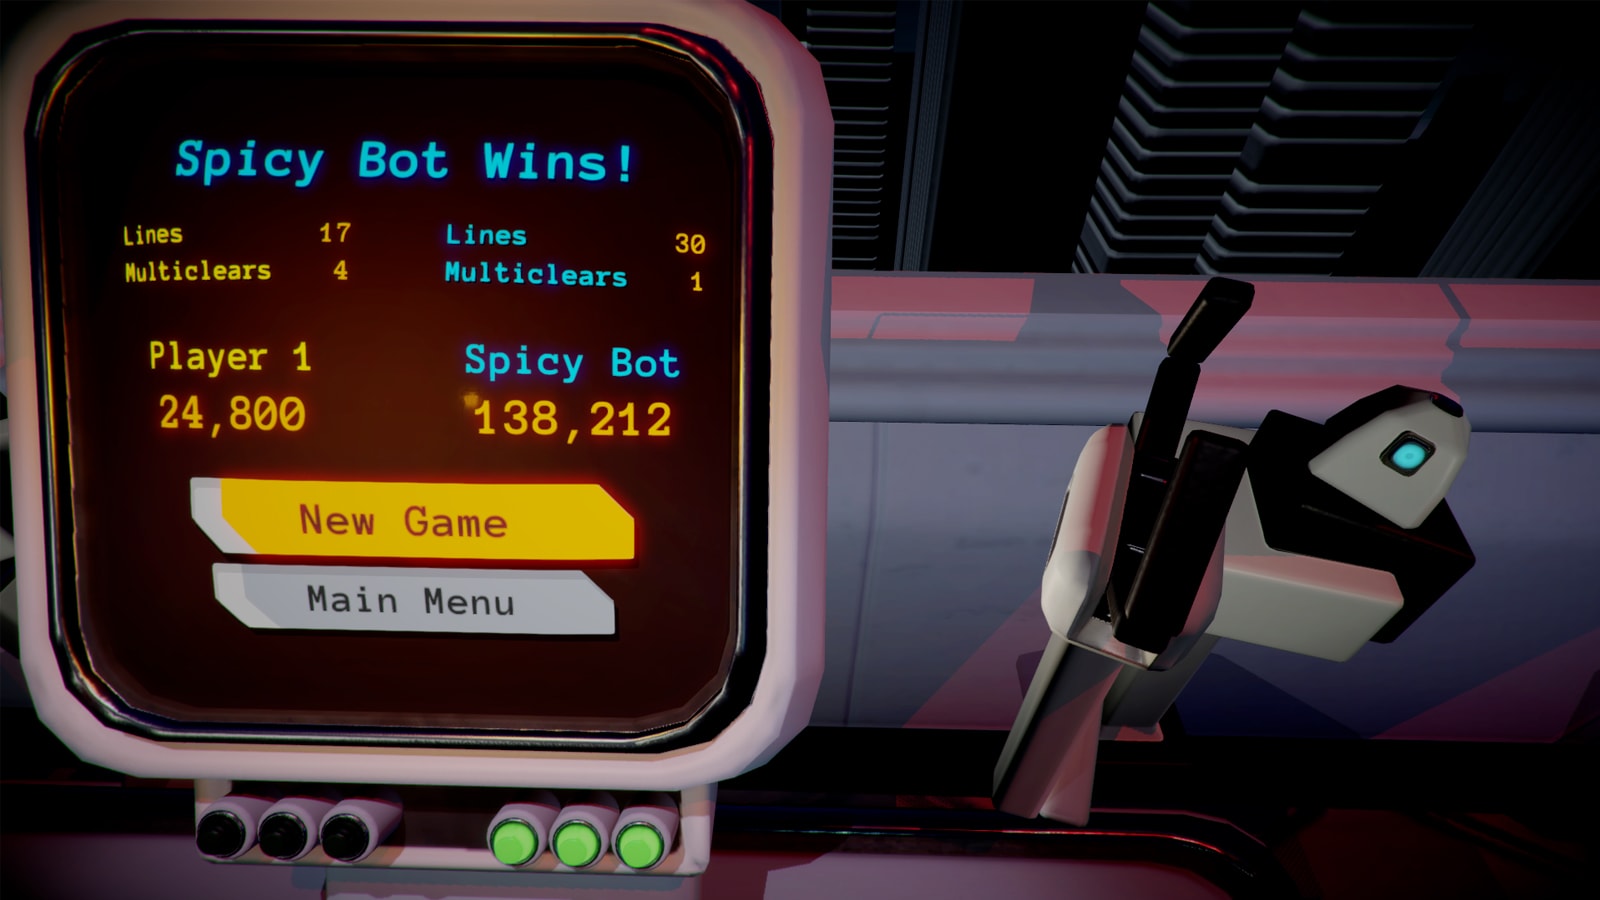 A computer screen says "Spicy Bot Wins!" with a "New Game" or "Main Menu" selection option. 